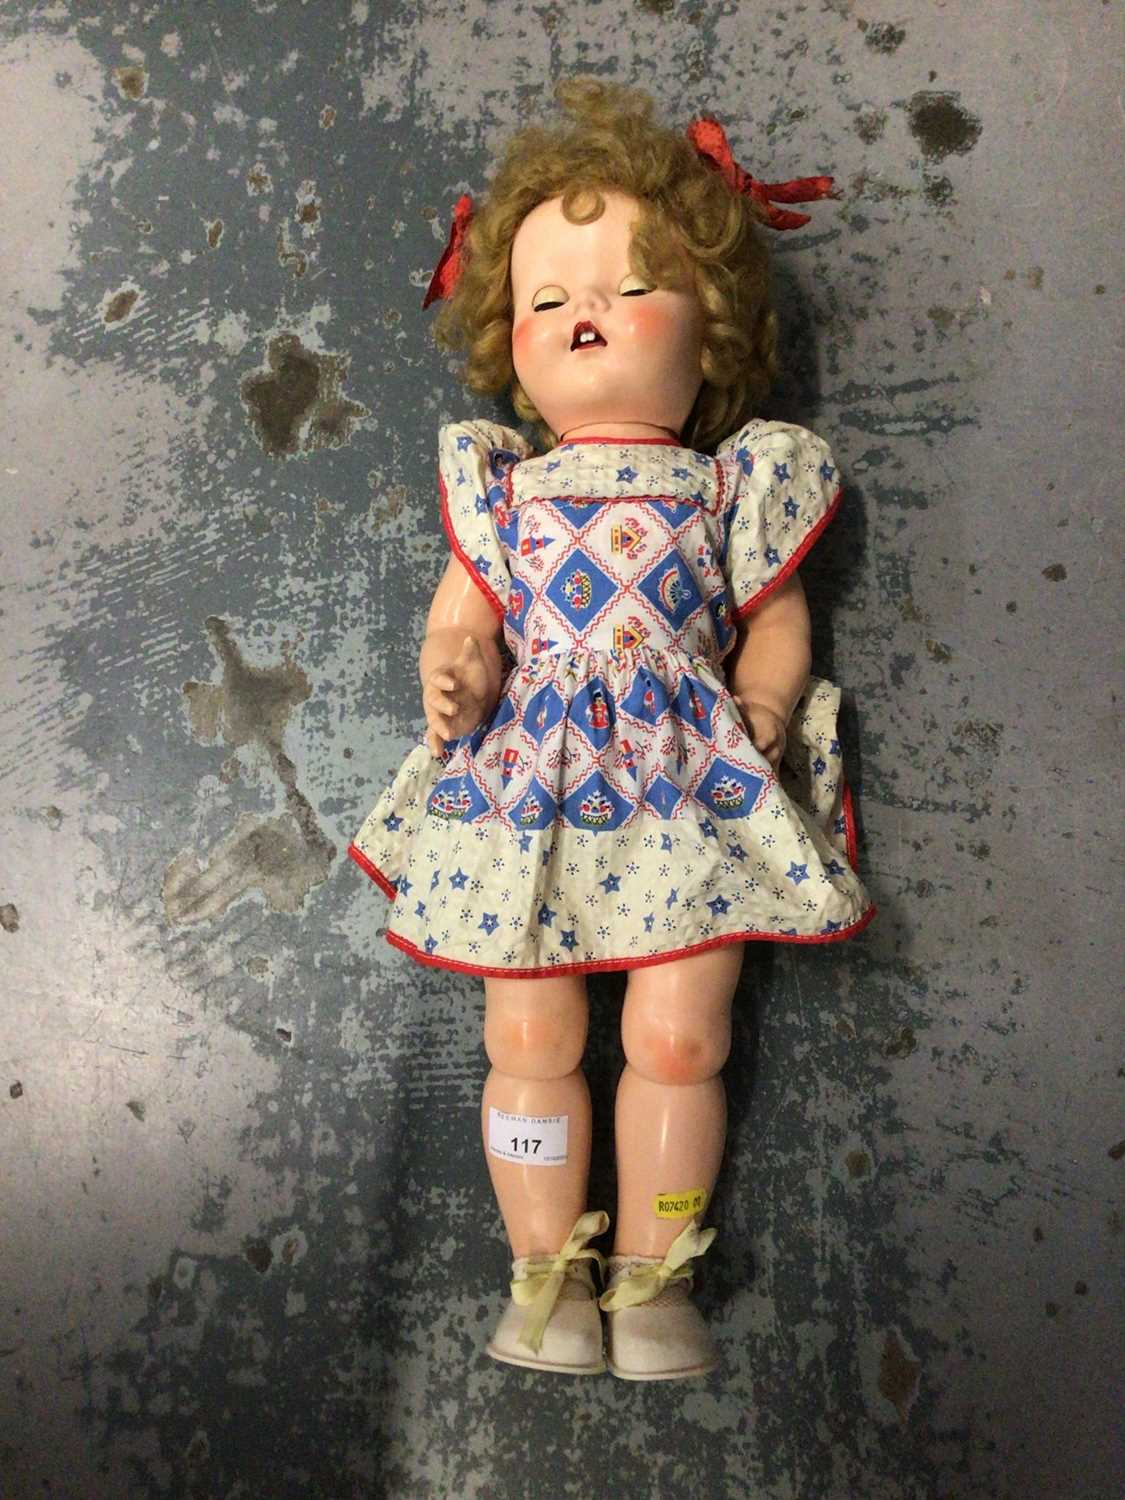 Bride dolls - from all eras - DOLLYSISTERS DOWN MEMORY LANE